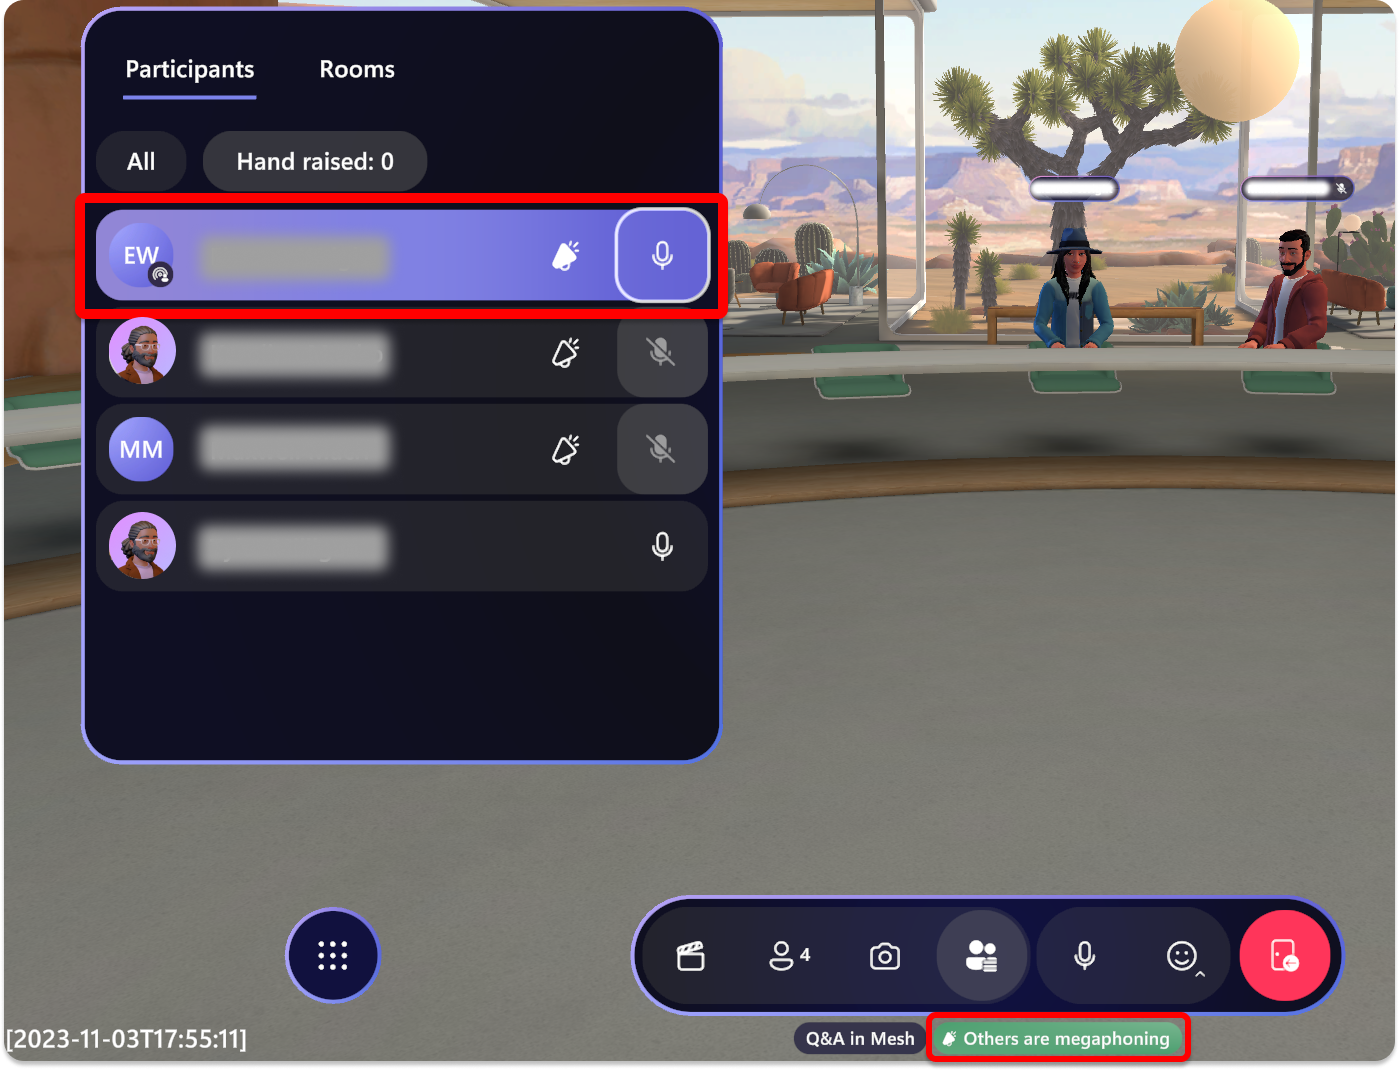 Screenshot of Mesh showing visual indicators that attendees are megaphoned or broadcast.